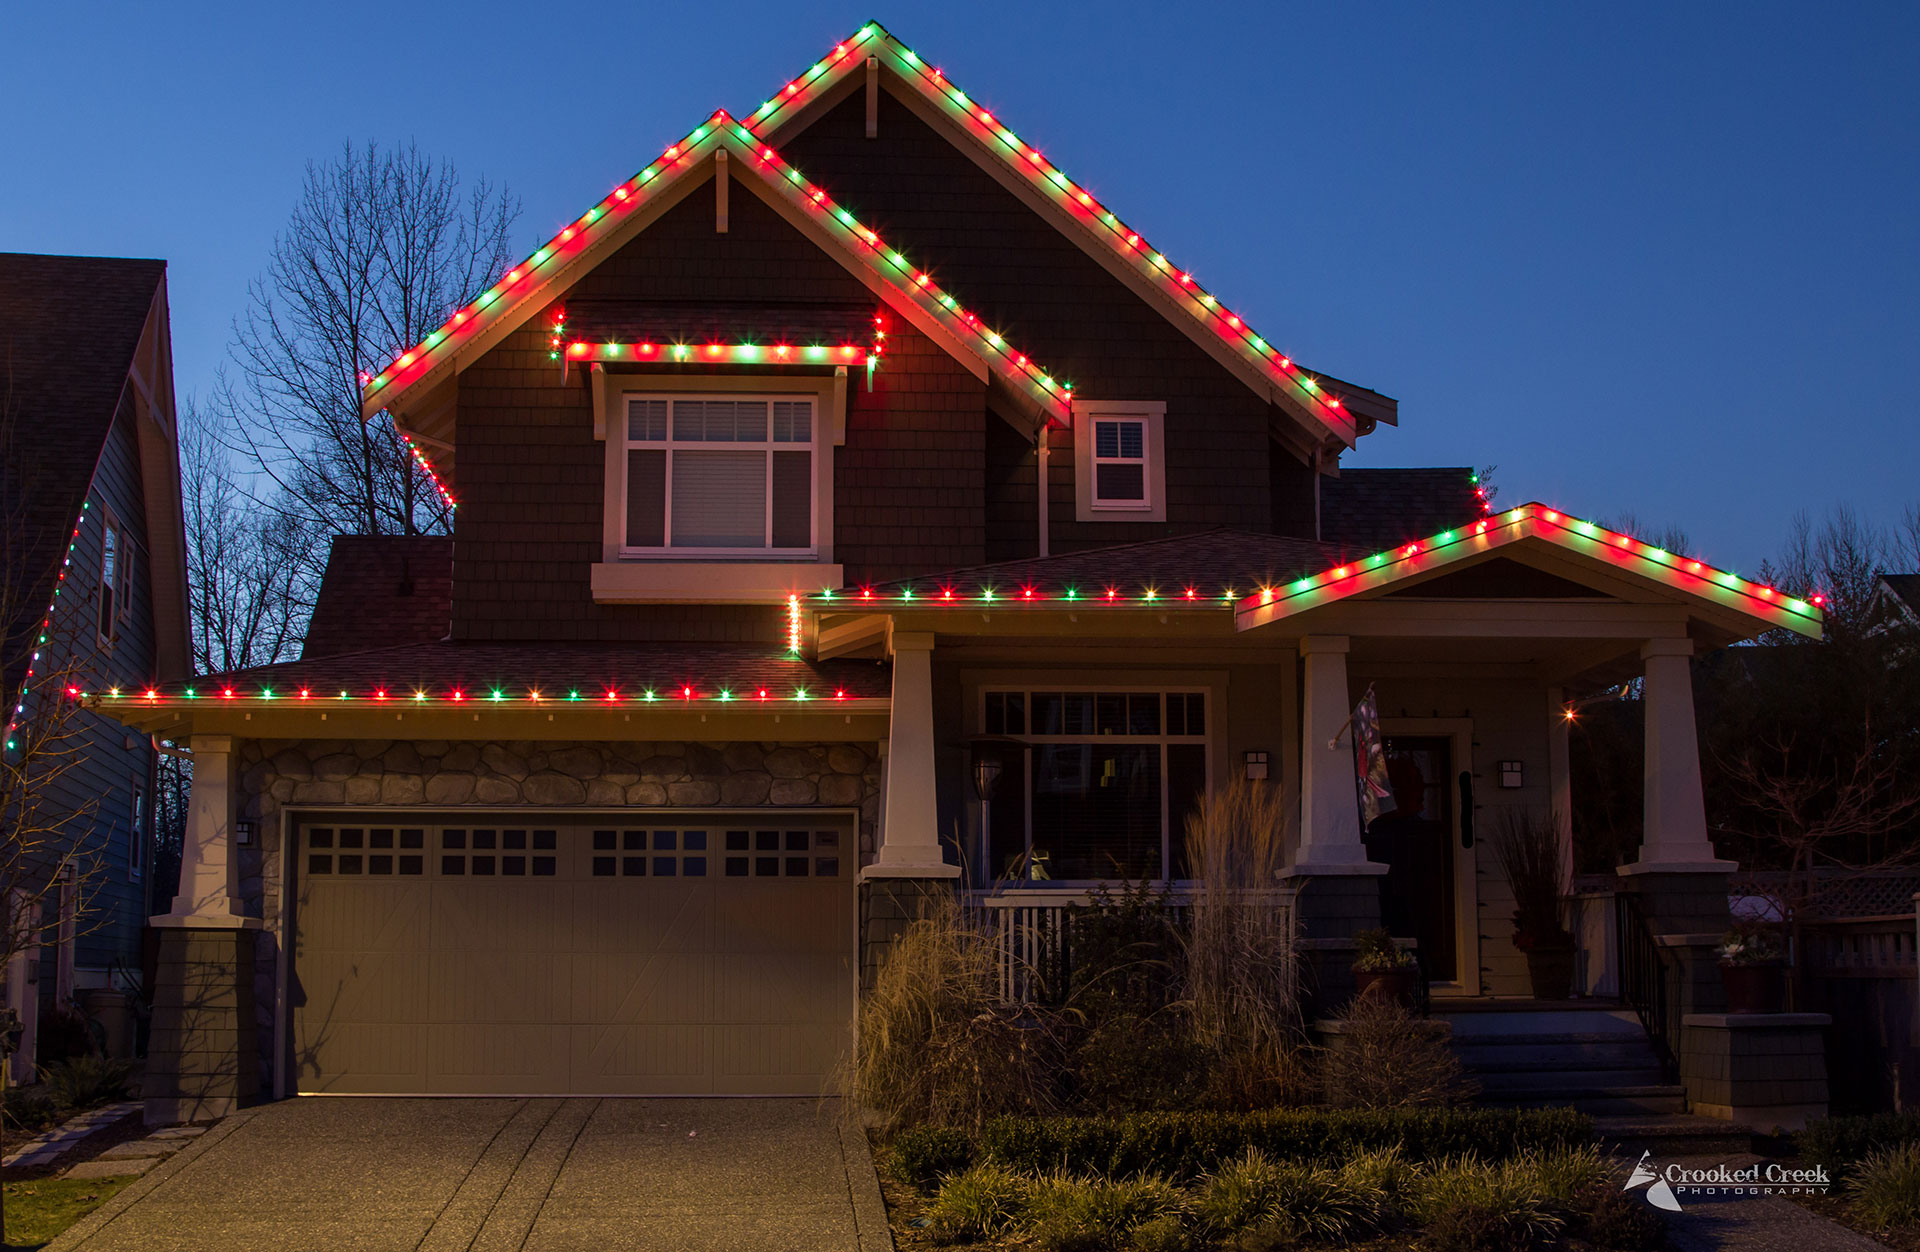 Top 5 Benefits of Permanent Exterior Holiday Lighting for Your Home